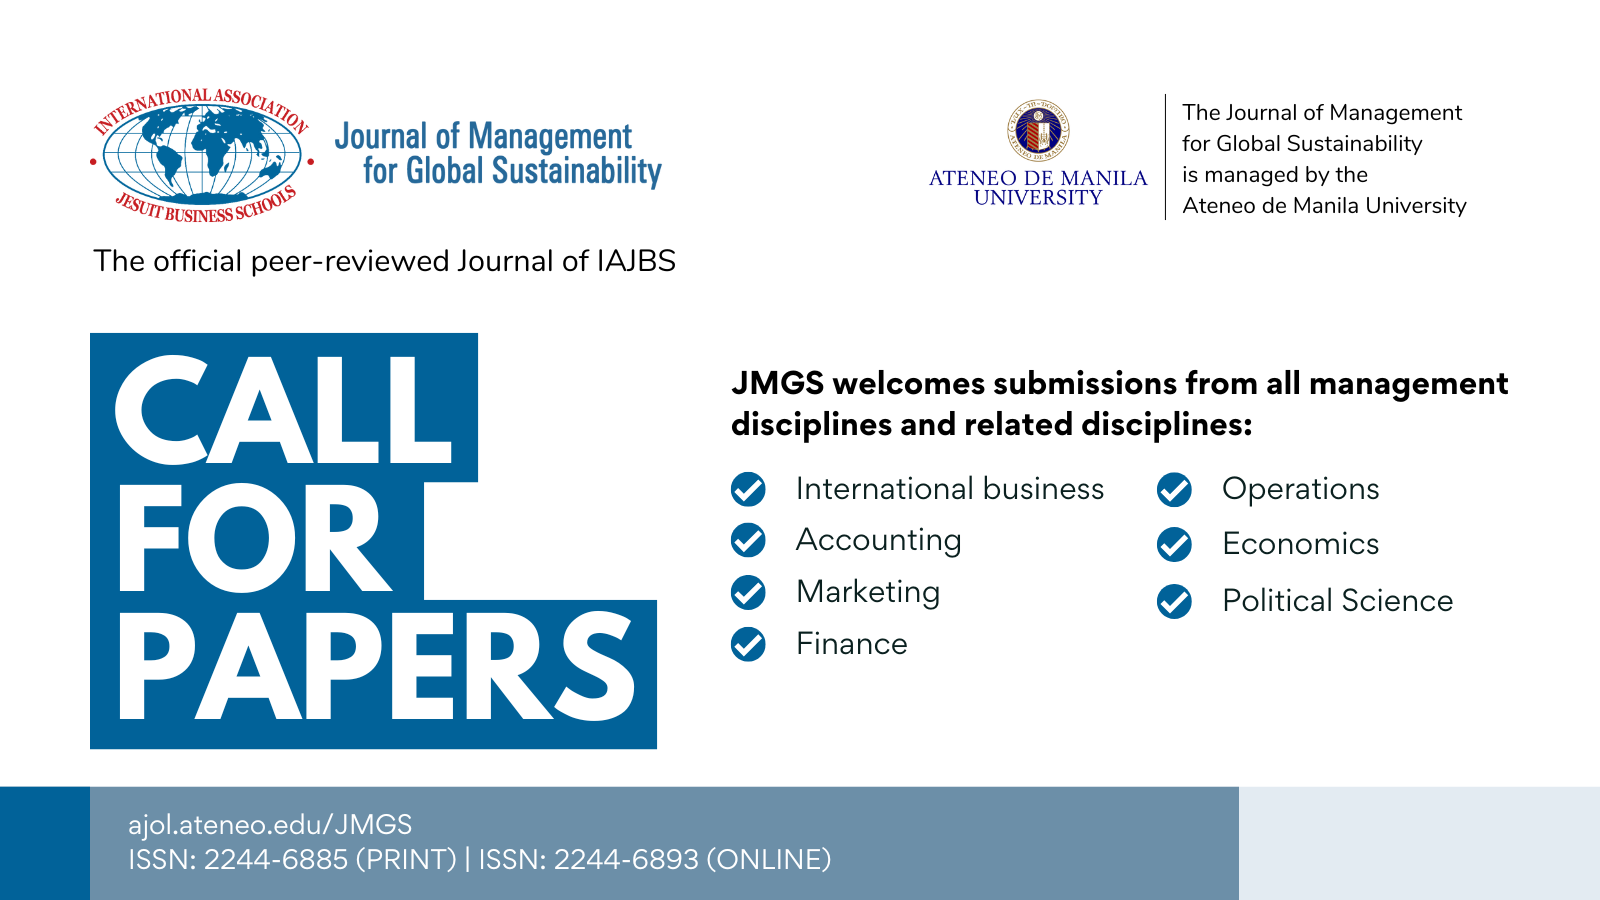 General Call for Papers